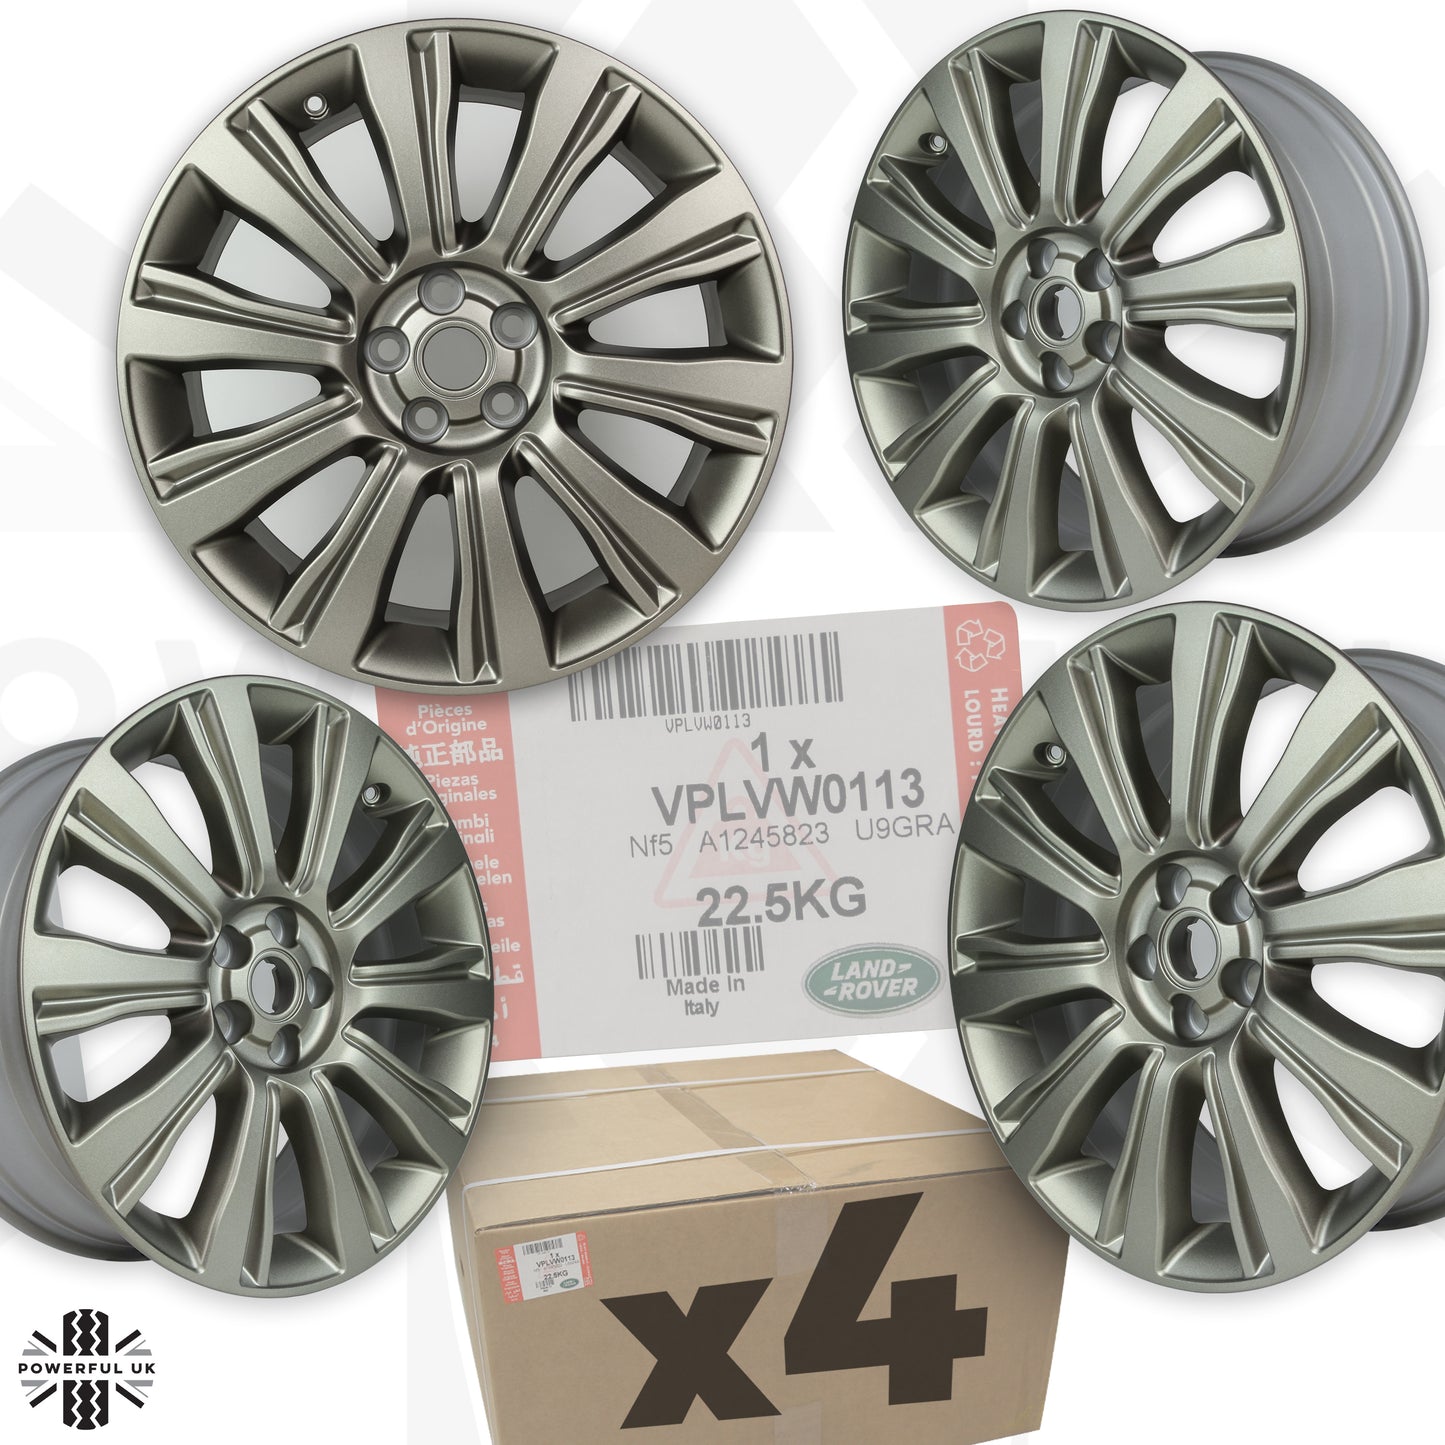 19" Alloy Wheels - Satin Grey Gold - Set of 4 for Land Rover Discovery Sport Genuine